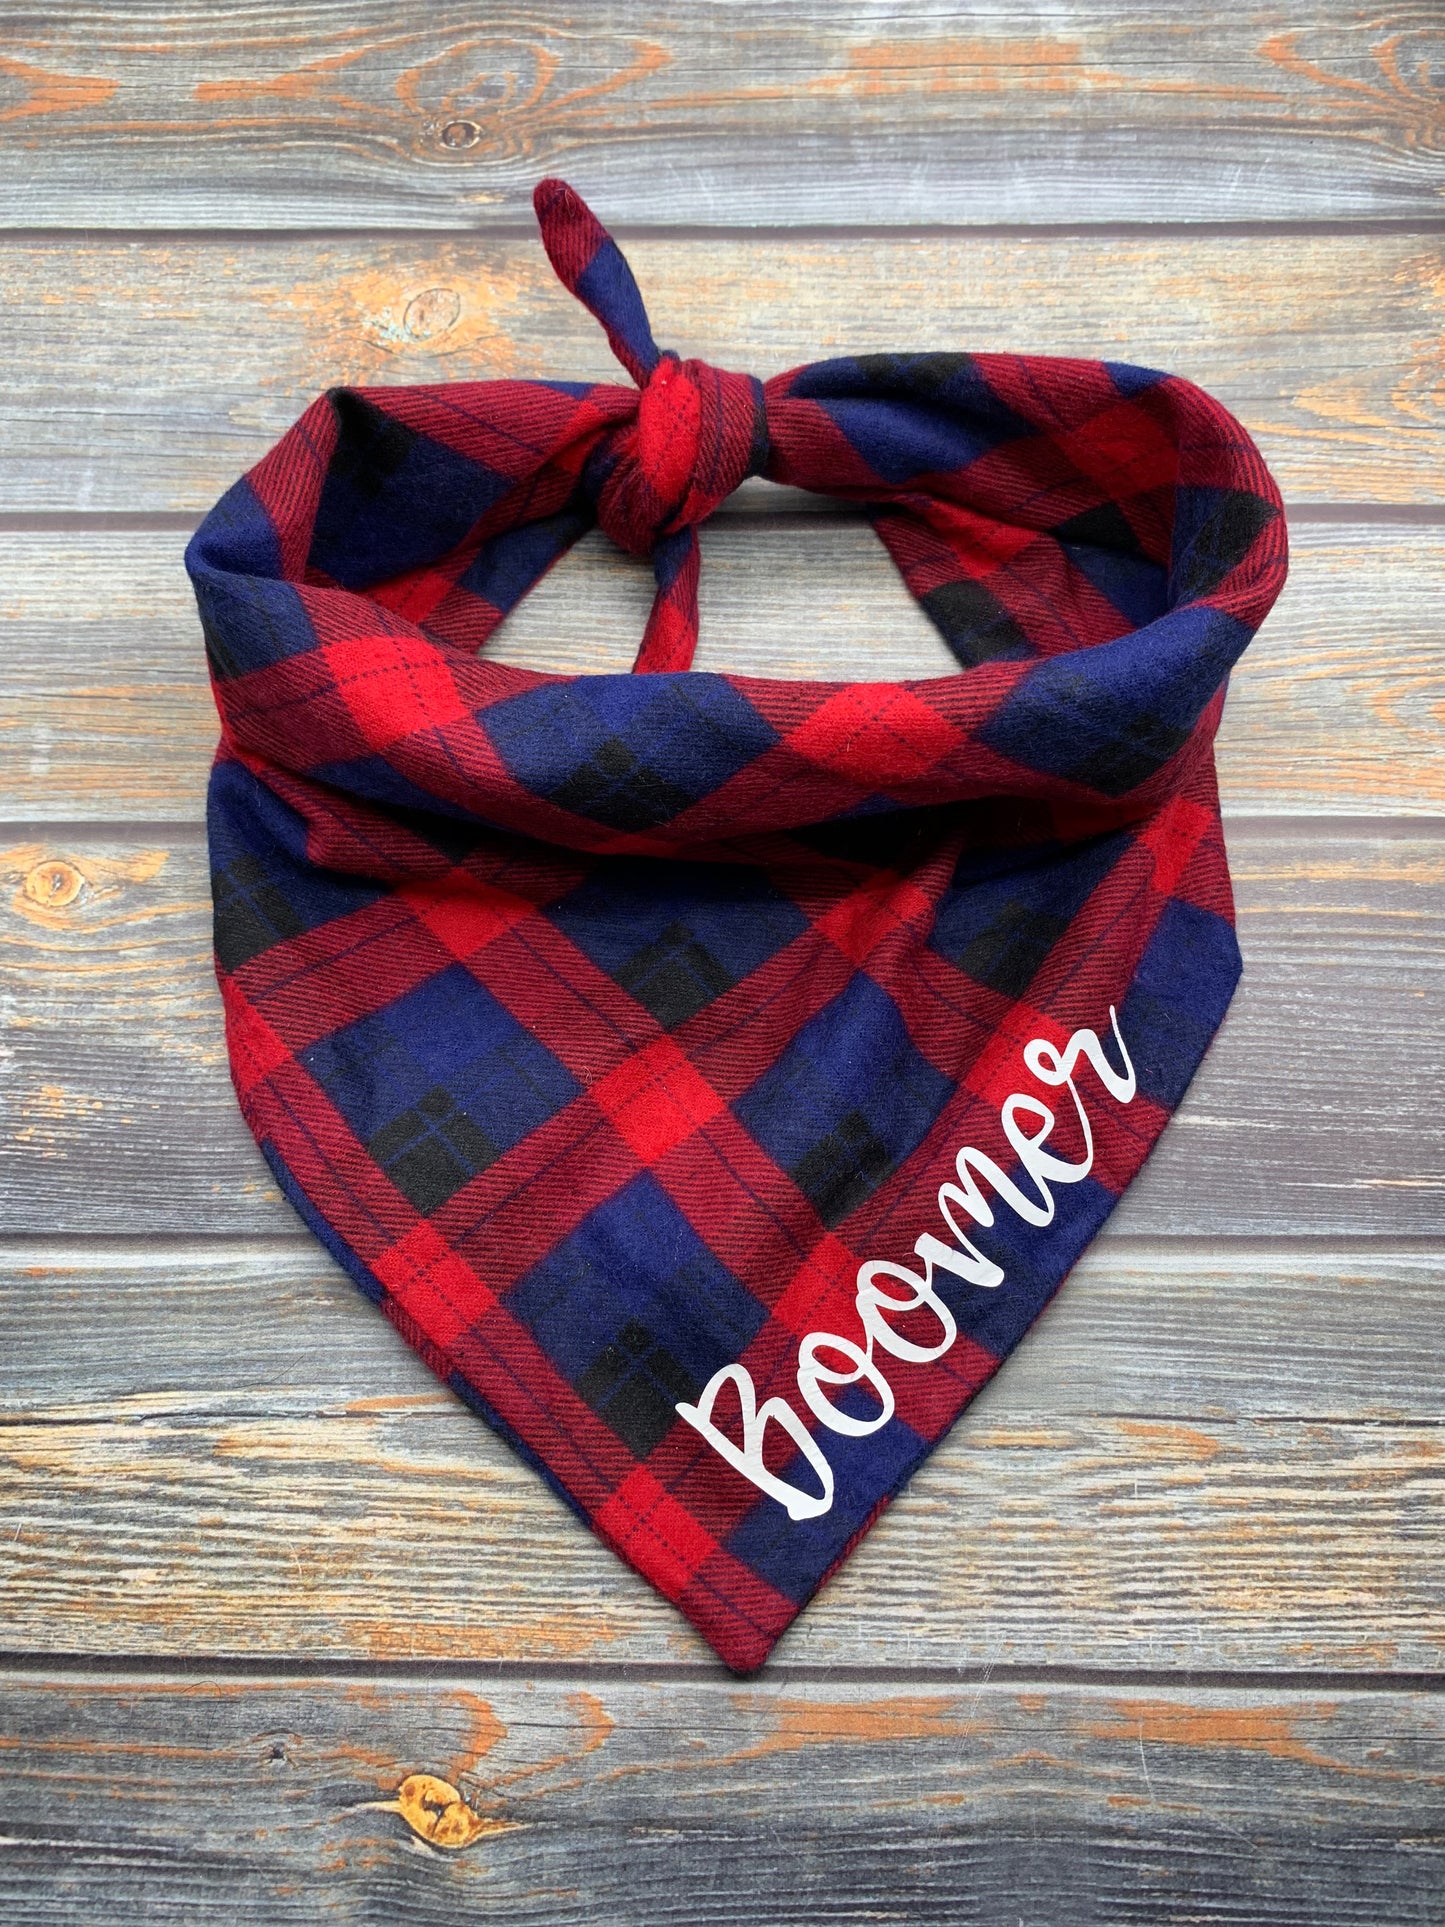 Red and Blue Plaid Flannel